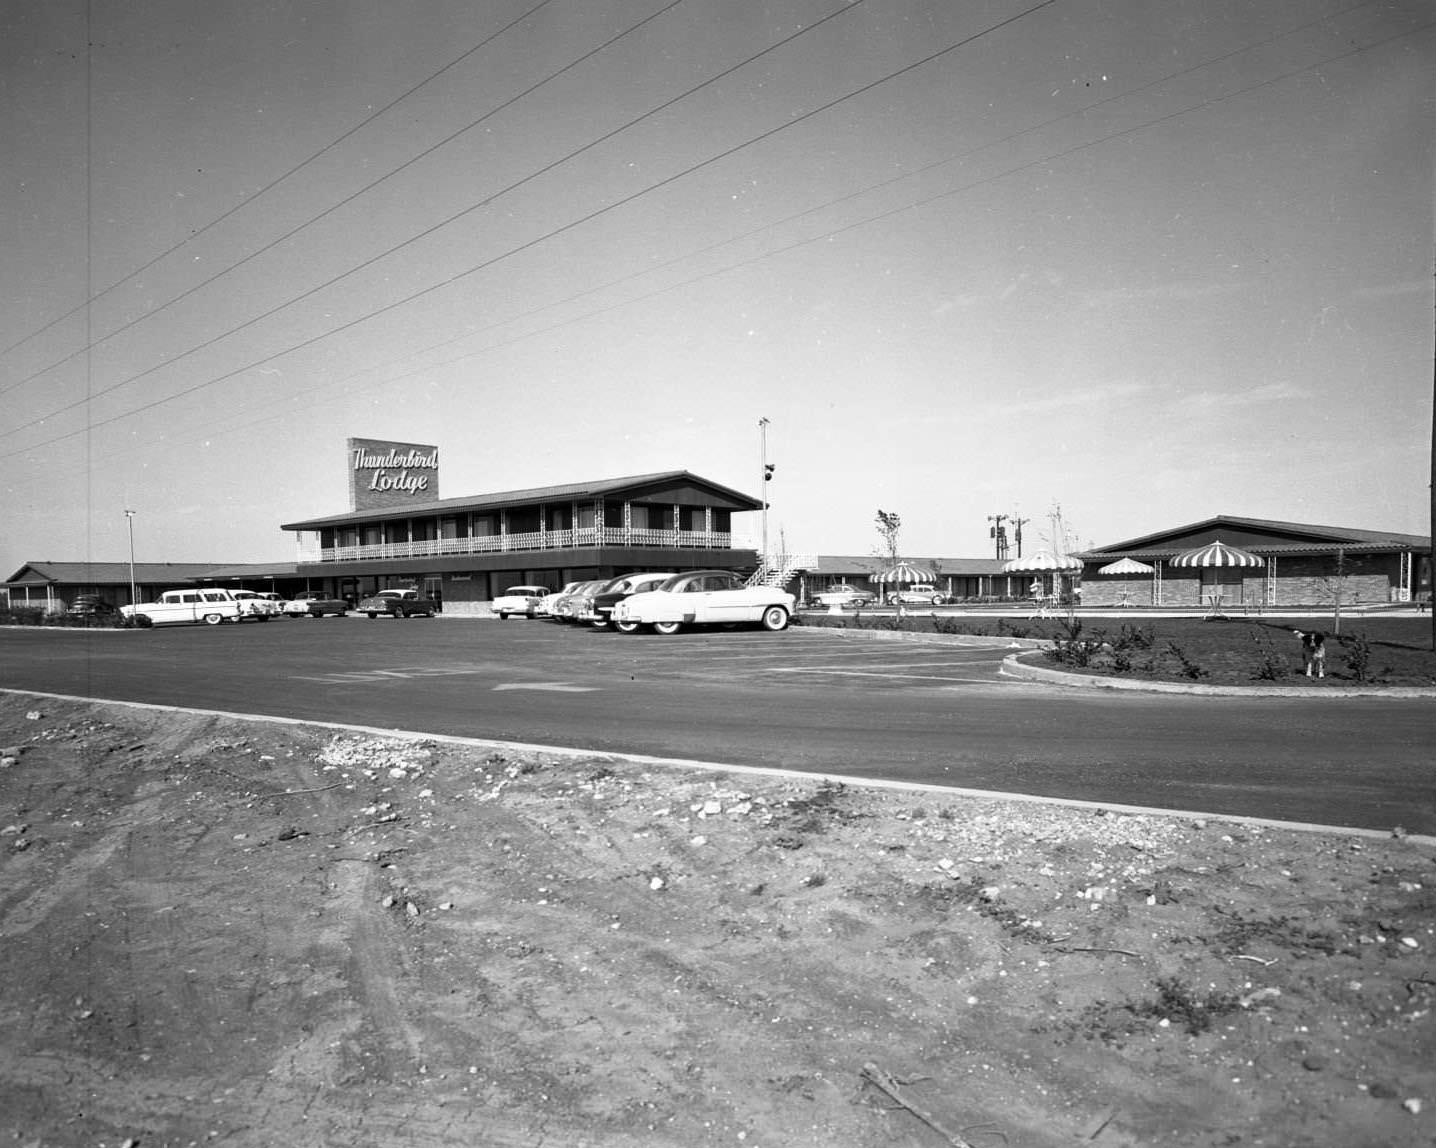 An exterior view of the Thunderbird Lodge, 1956